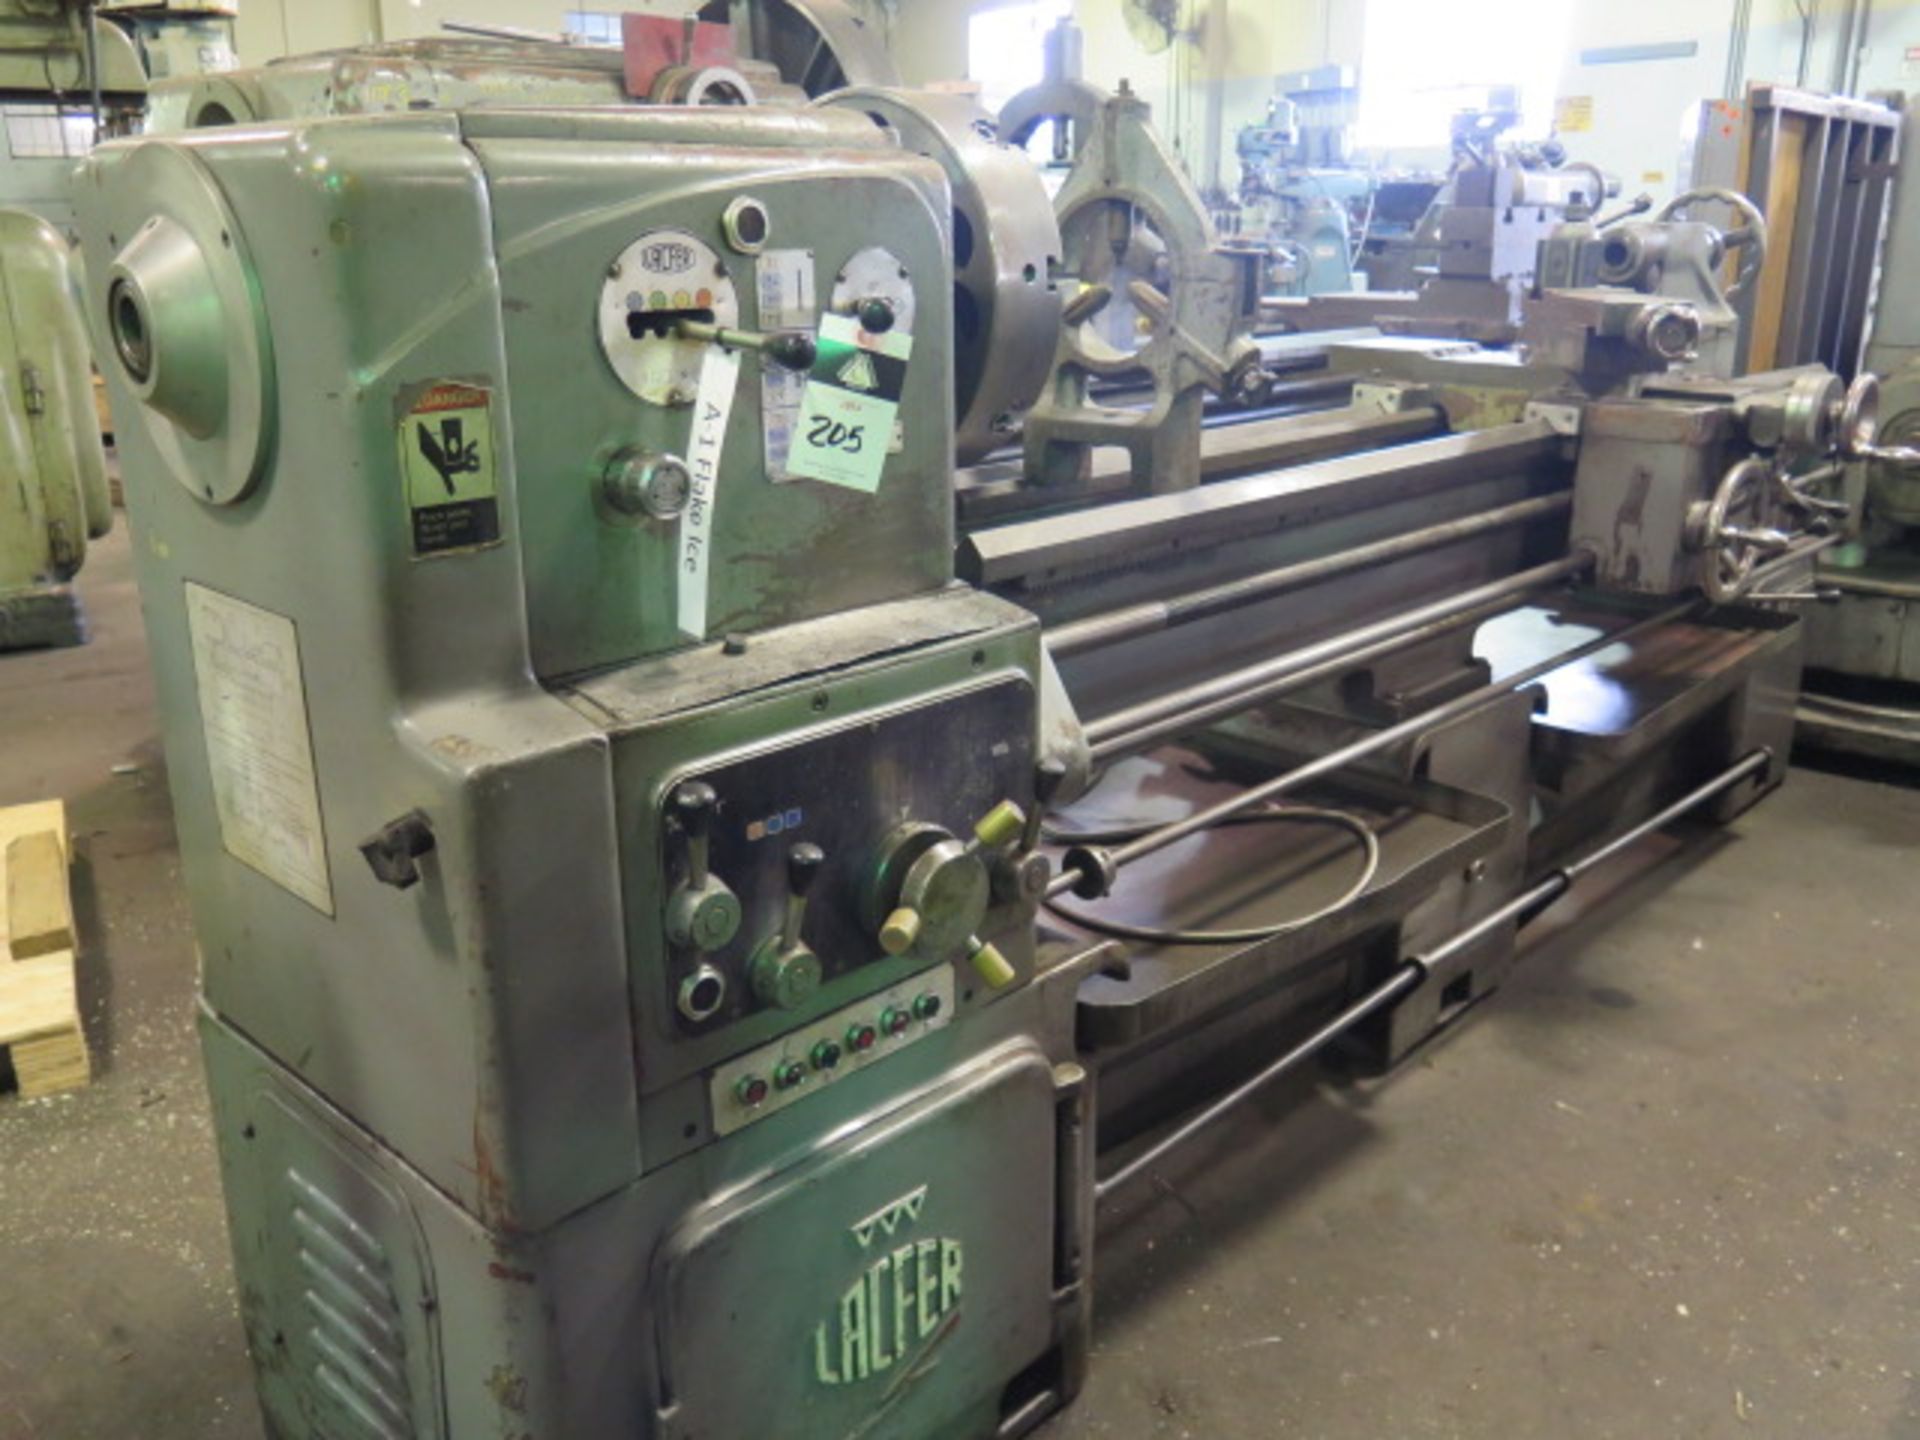 Lacfer 20” x 84” Geared Head Gap Bed Lathe w/ 32-2000 RPM, Inch/mm Threading, Tailstock, SOLD AS IS